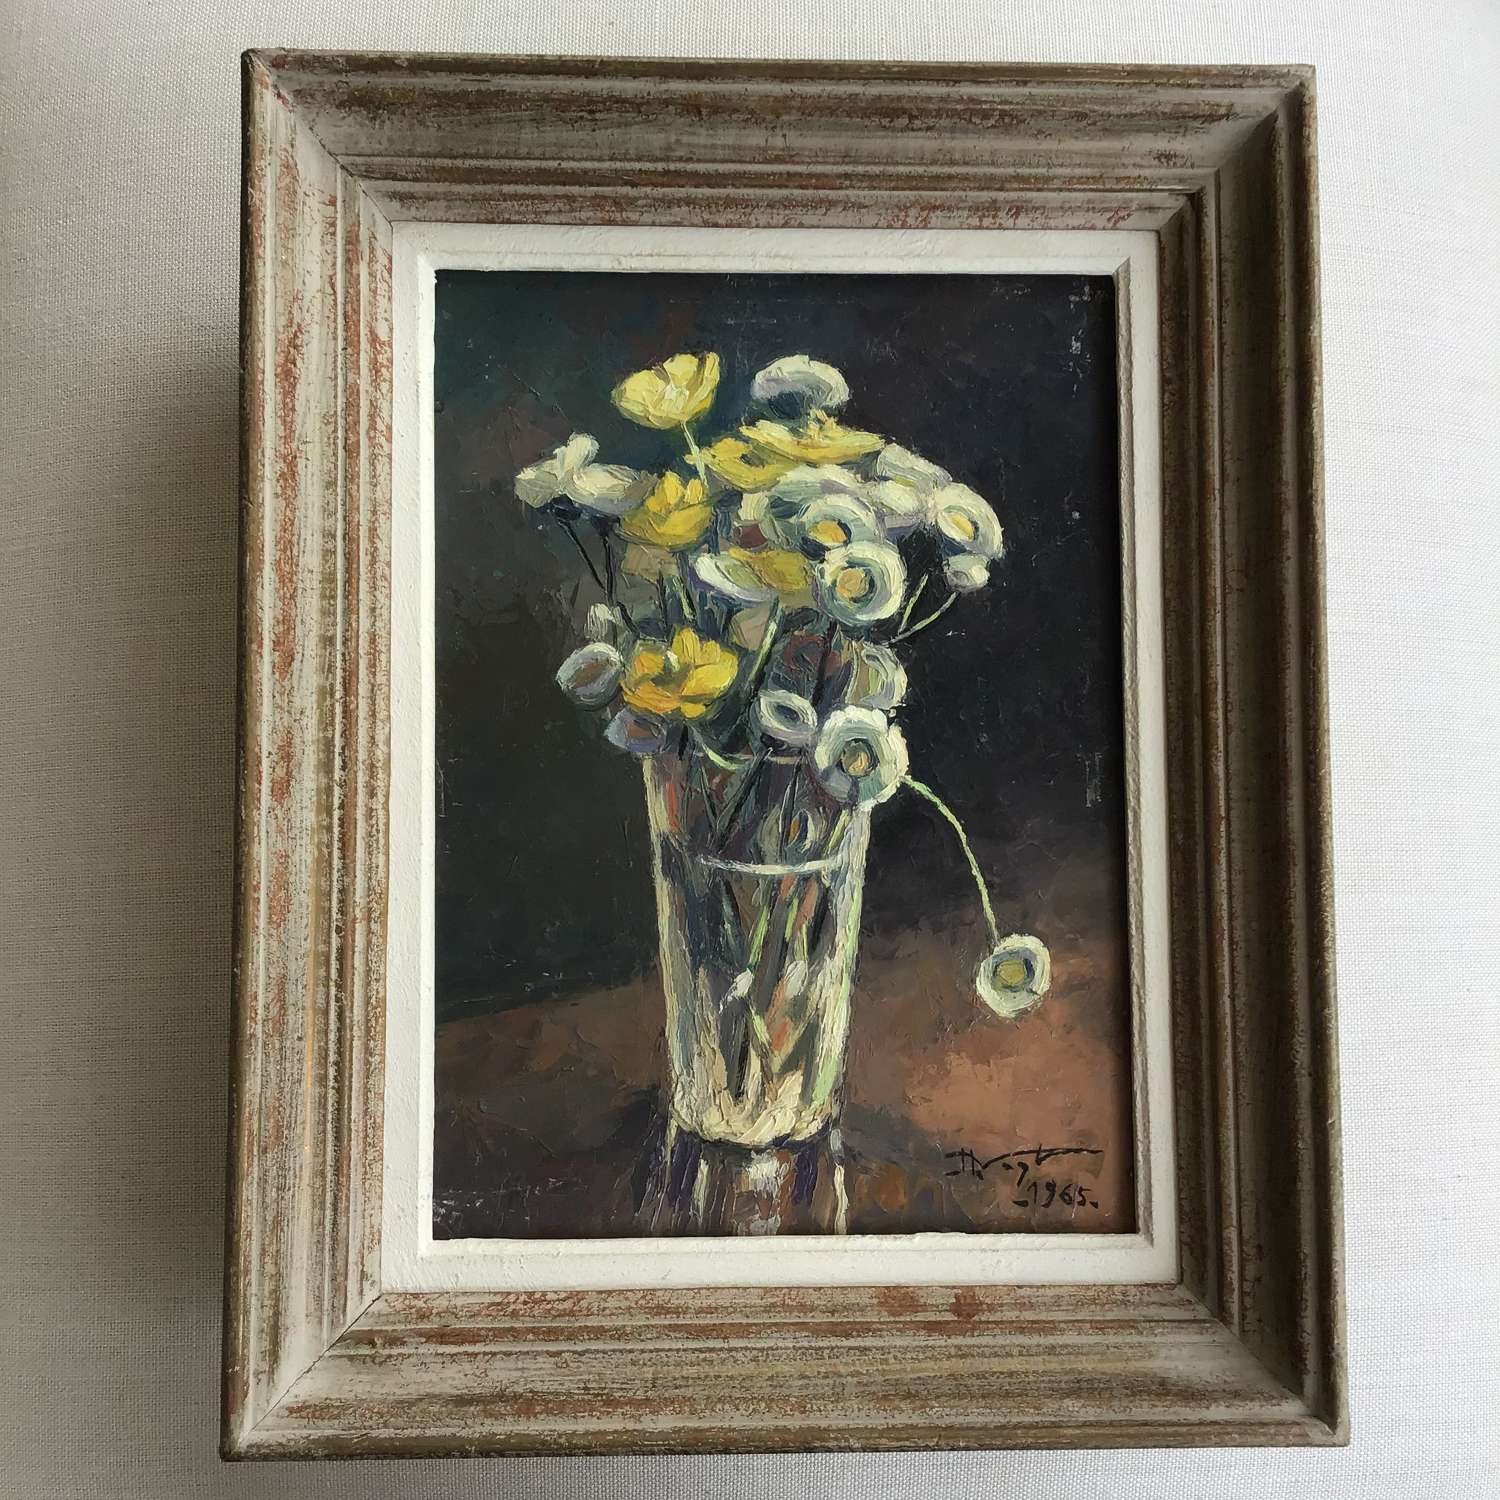 A vintage oil painting of flowers in a glass vase signed by the artist